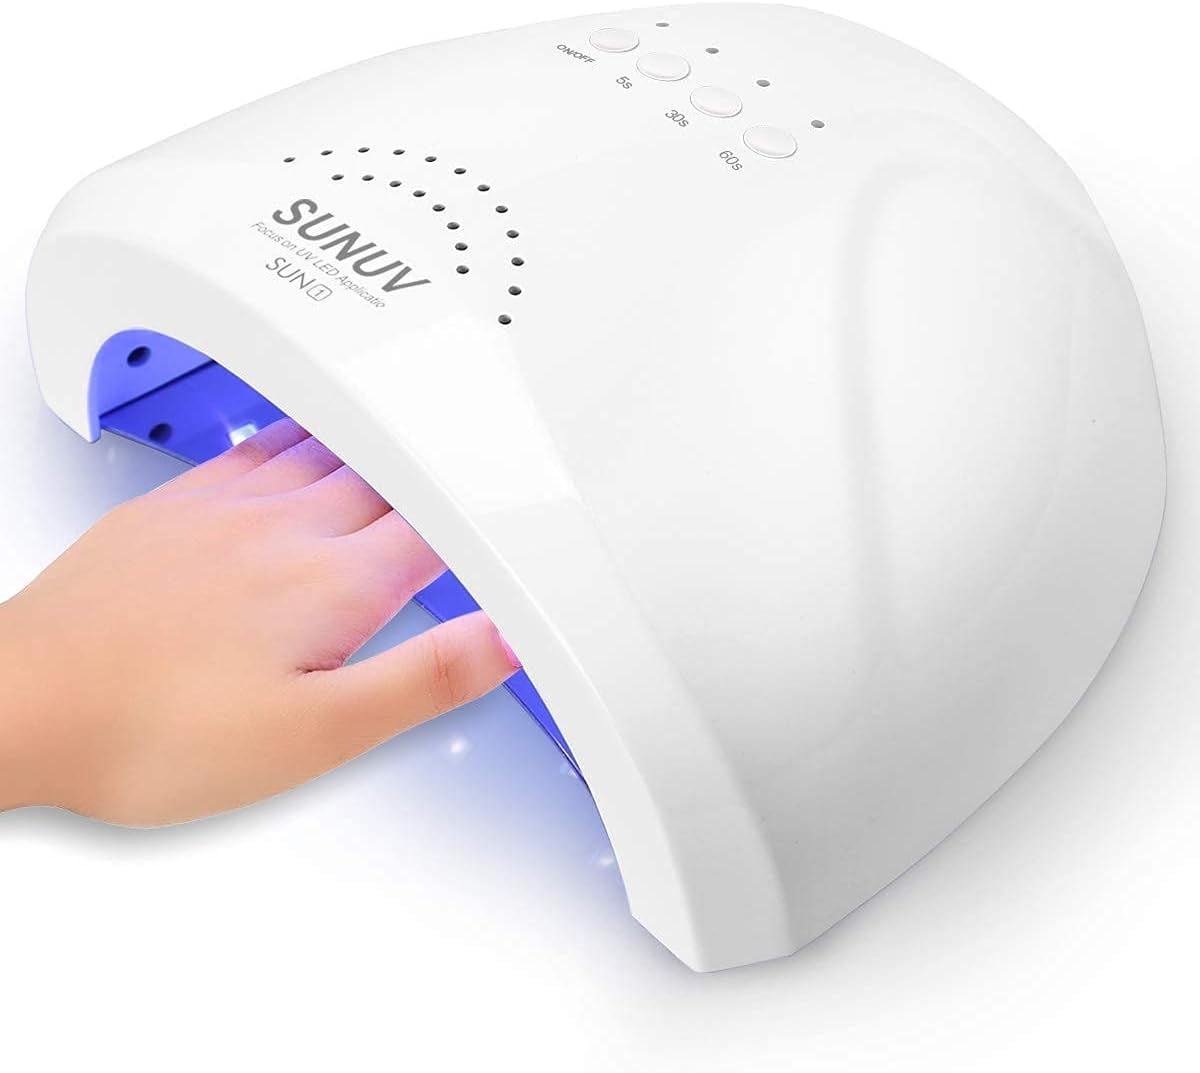 UV nail dryers may pose cancer risks, a study says. Here are precautions  you can take - Harvard Street Neighborhood Health Center